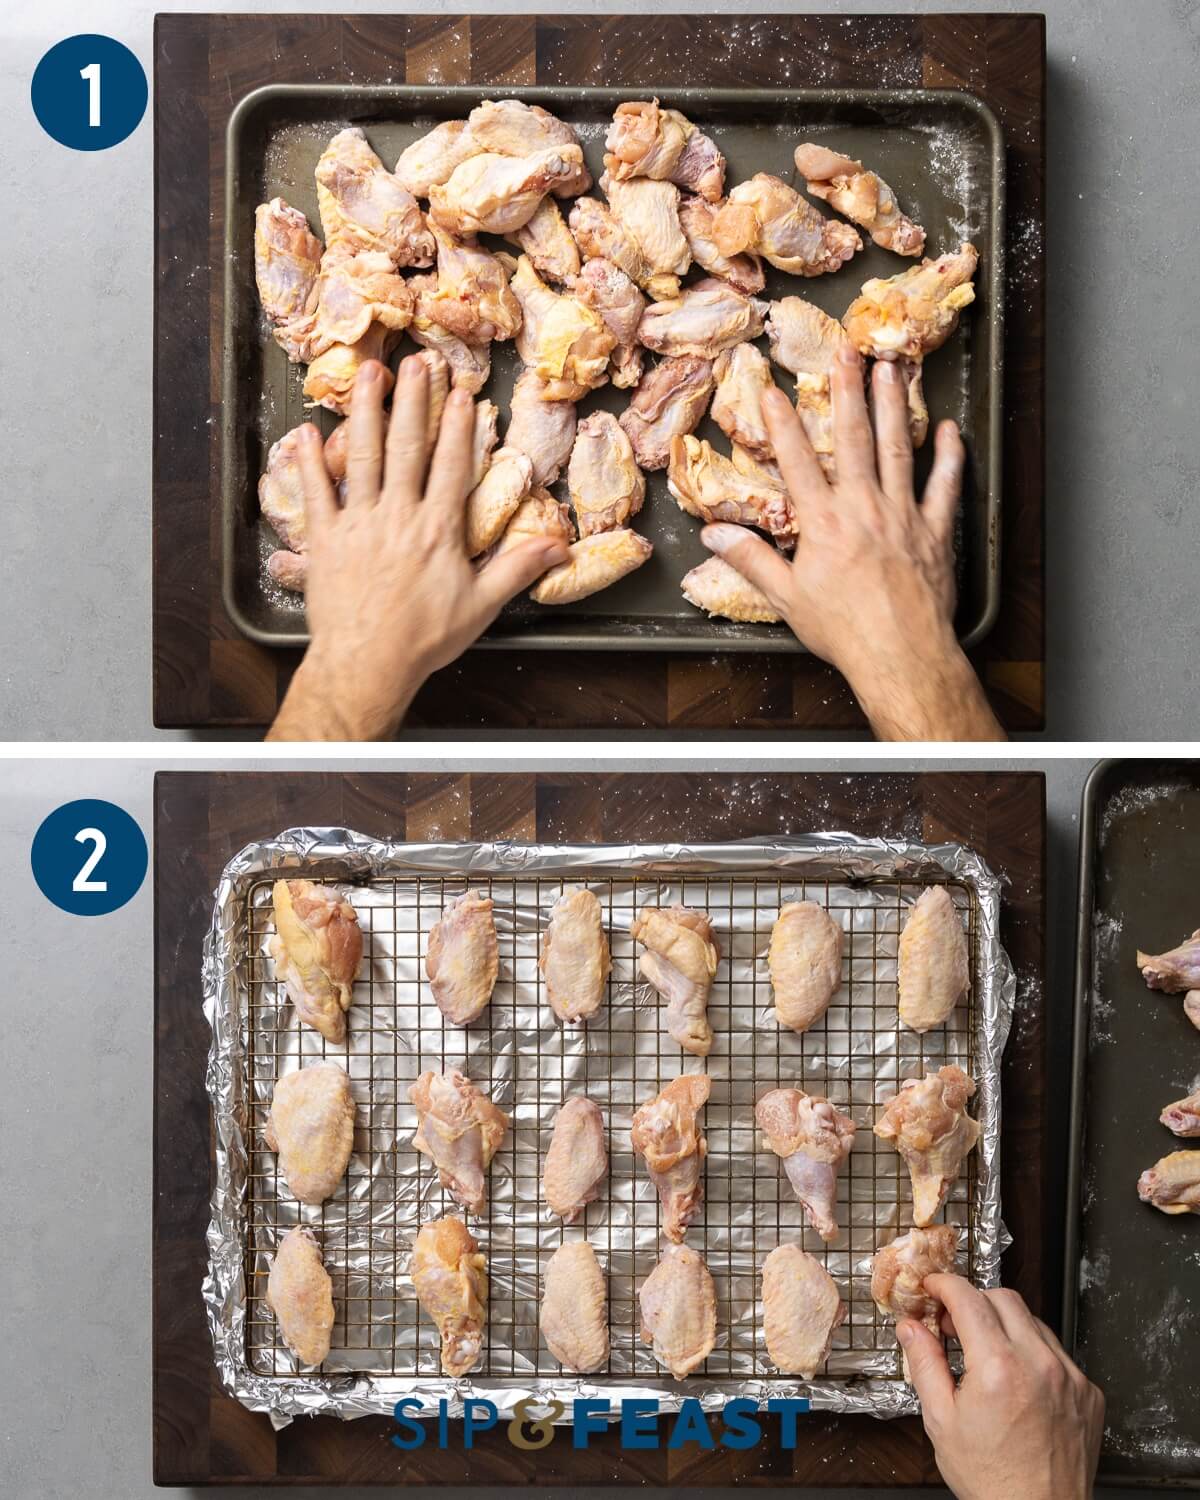 Garlic parmesan chicken wings recipe process collage one showing mixing wings with baking powder and salt and spreading wings out on wire rack.